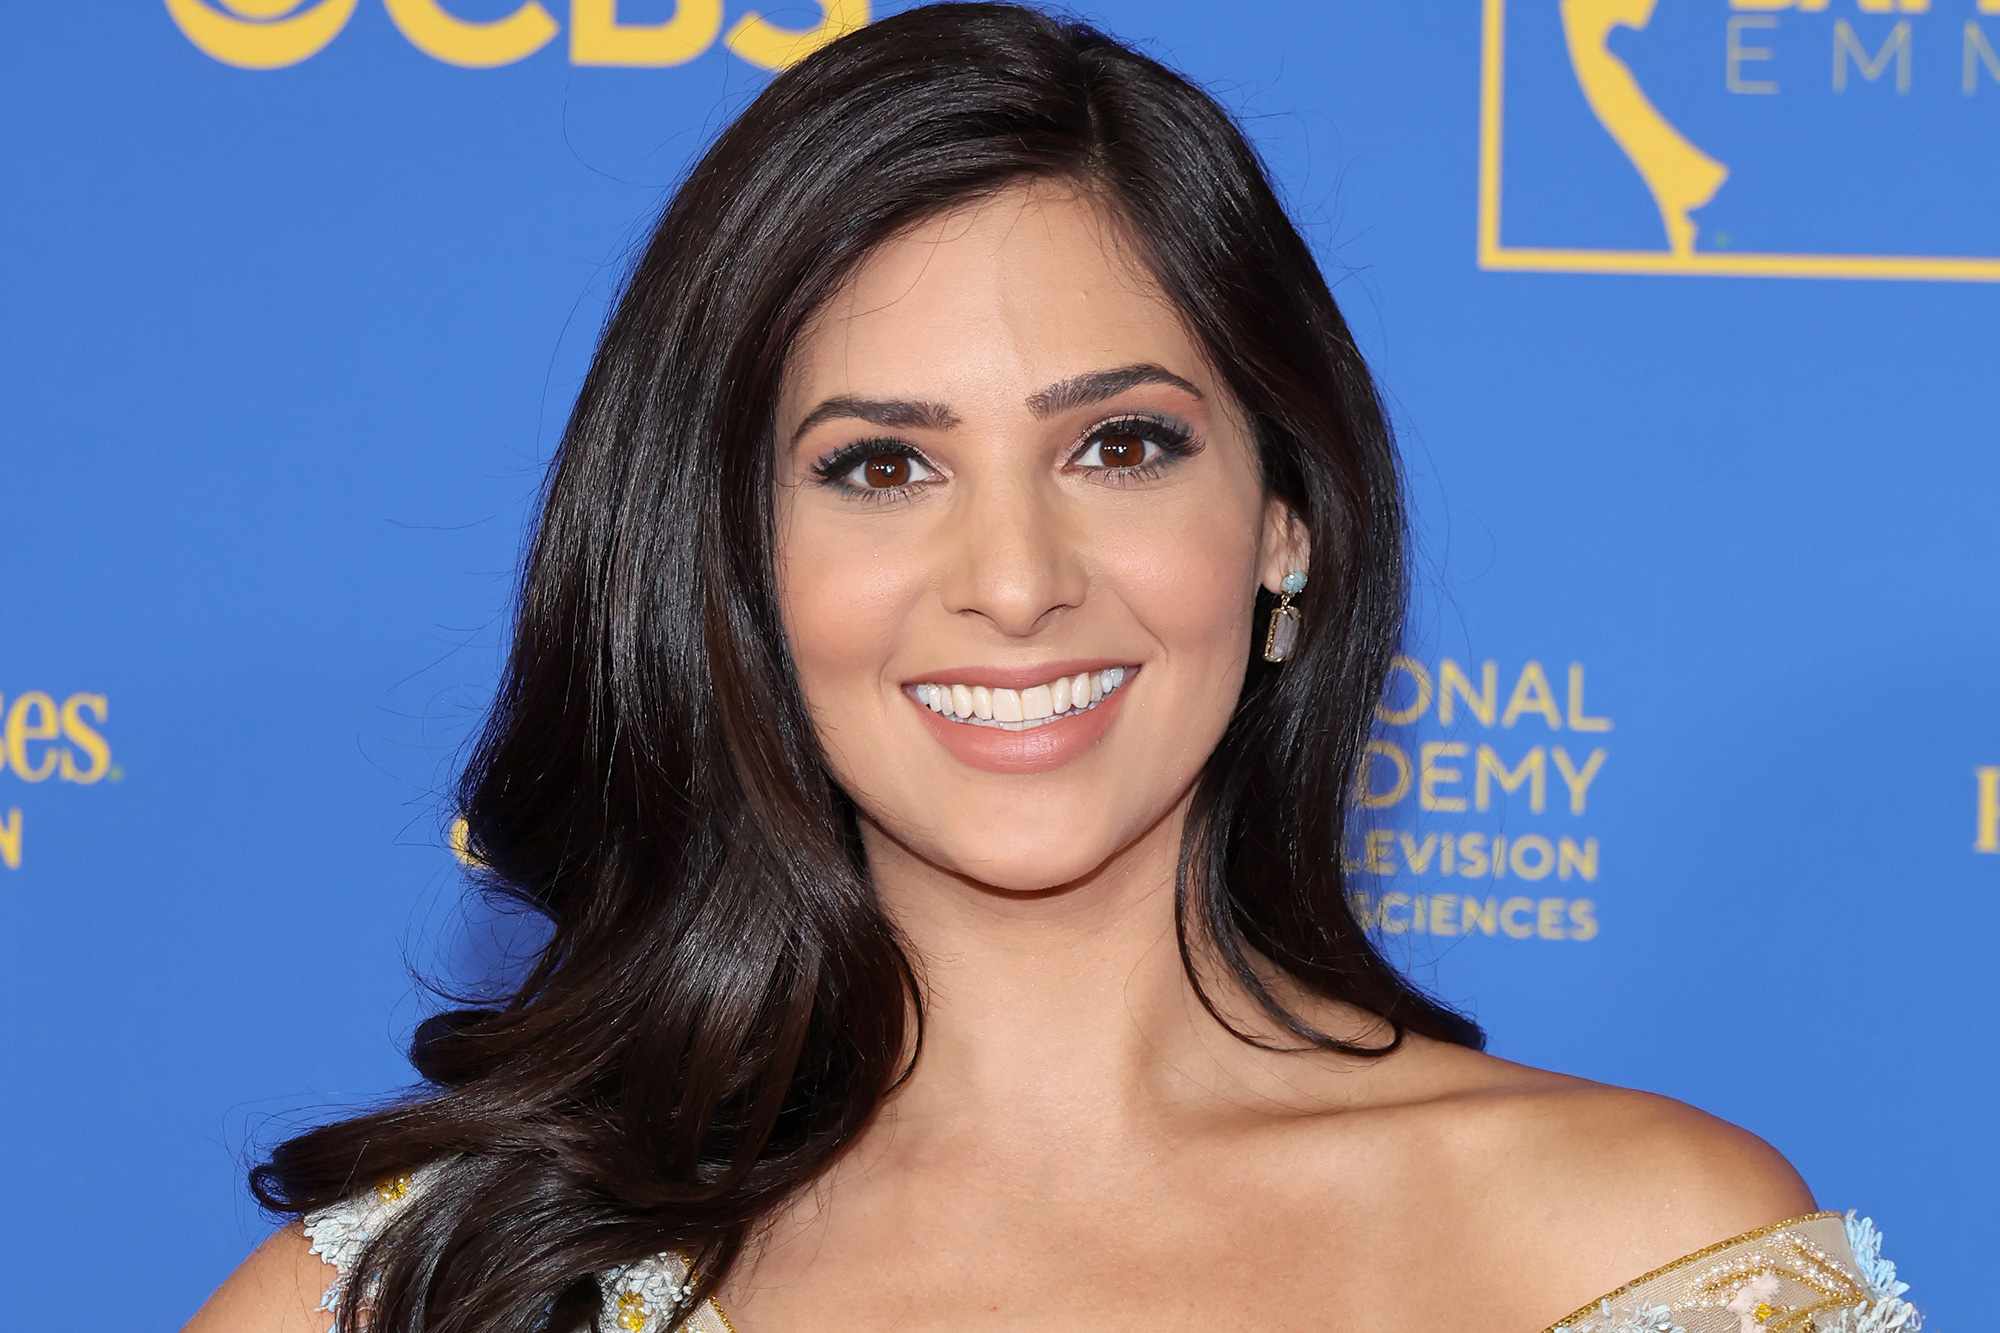 Camila Banus Appears to Call Out Former “Days of Our Lives” Colleagues’ 'Behavior' After Exit from the Show